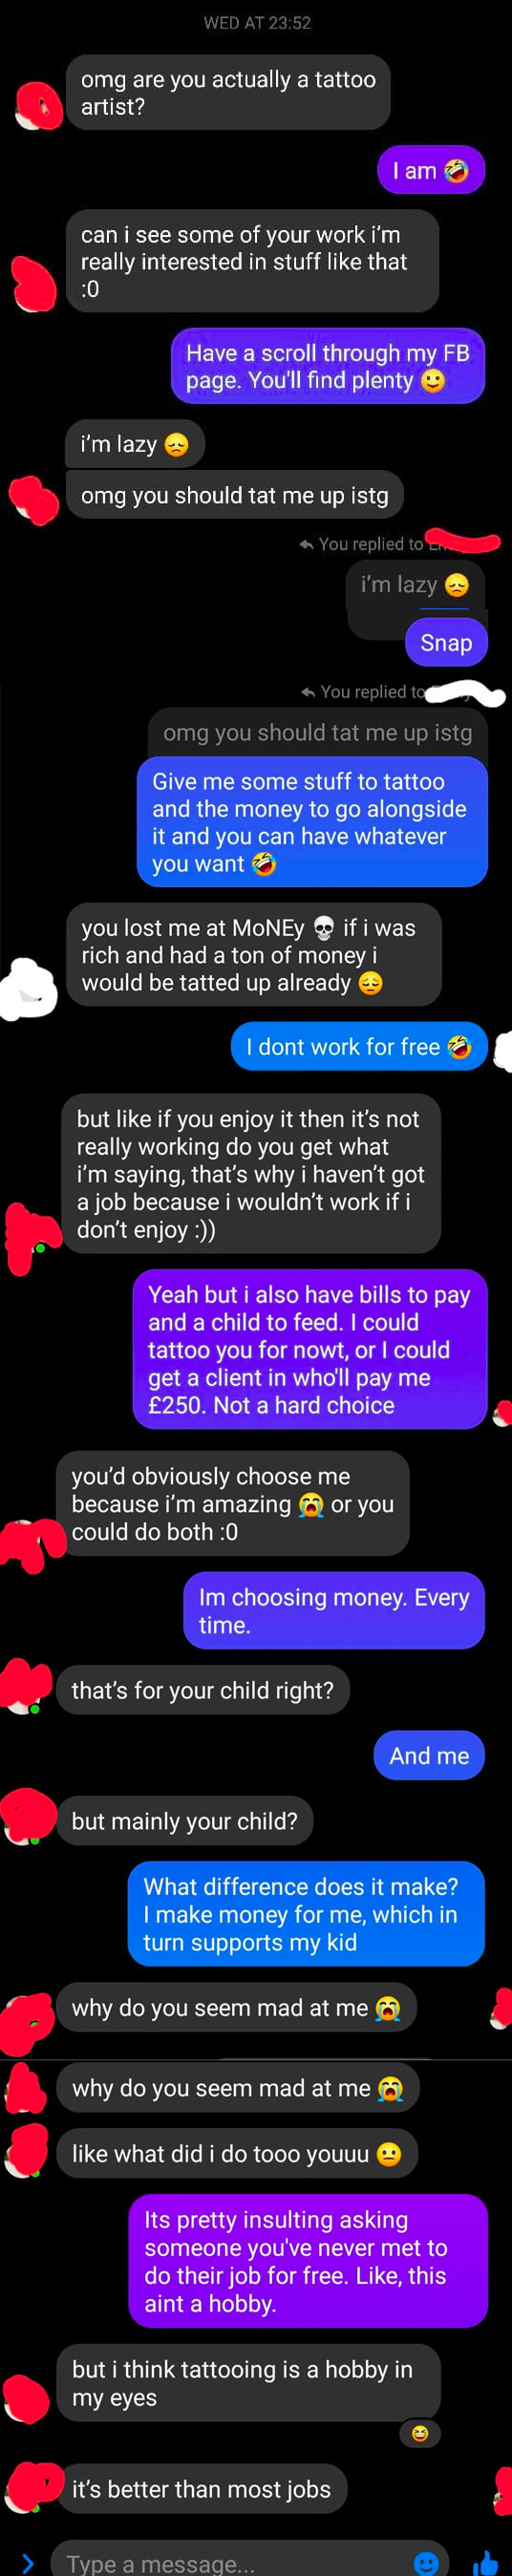 A client asking for a free tattoo, the artist declining, and the client pushes back and says it&#x27;s not really a job, it&#x27;s more of a hobby, so the tattoo artist shouldn&#x27;t charge them